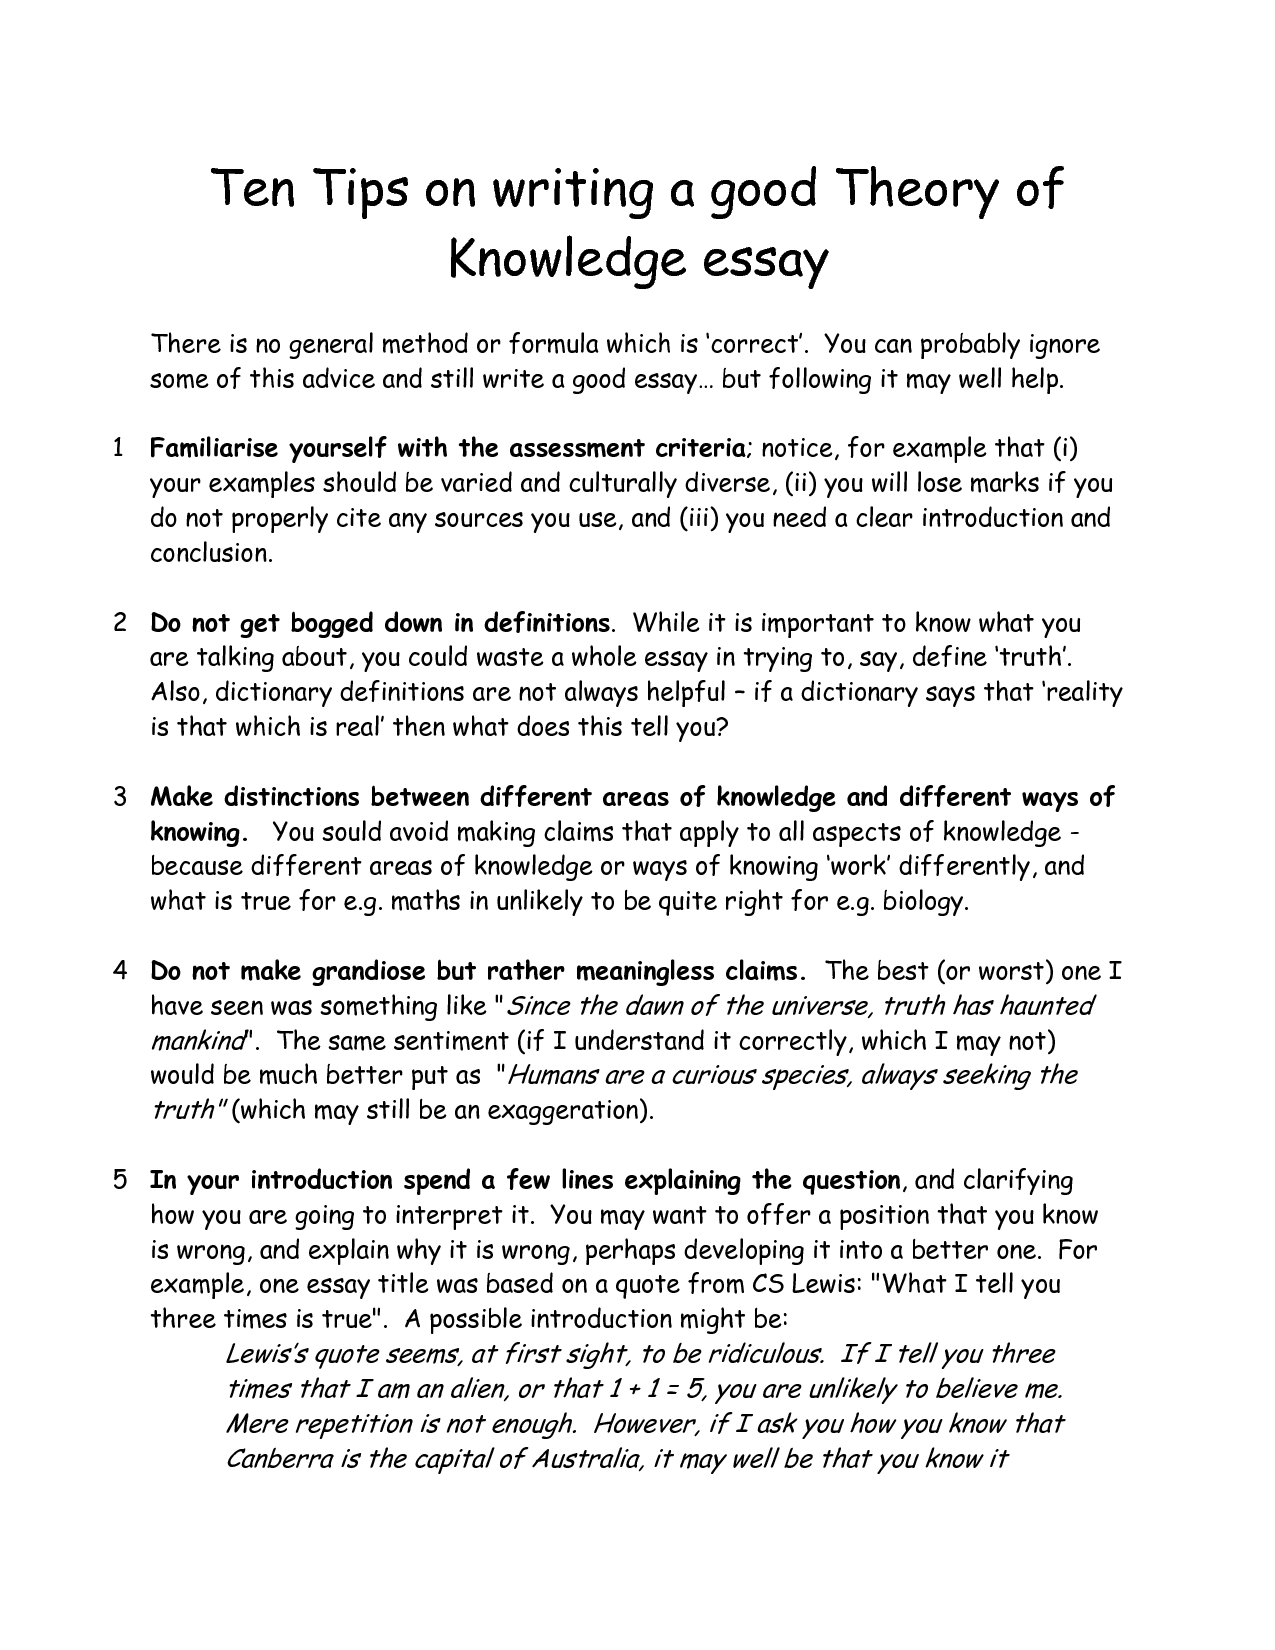 How to write an admission essay about myself